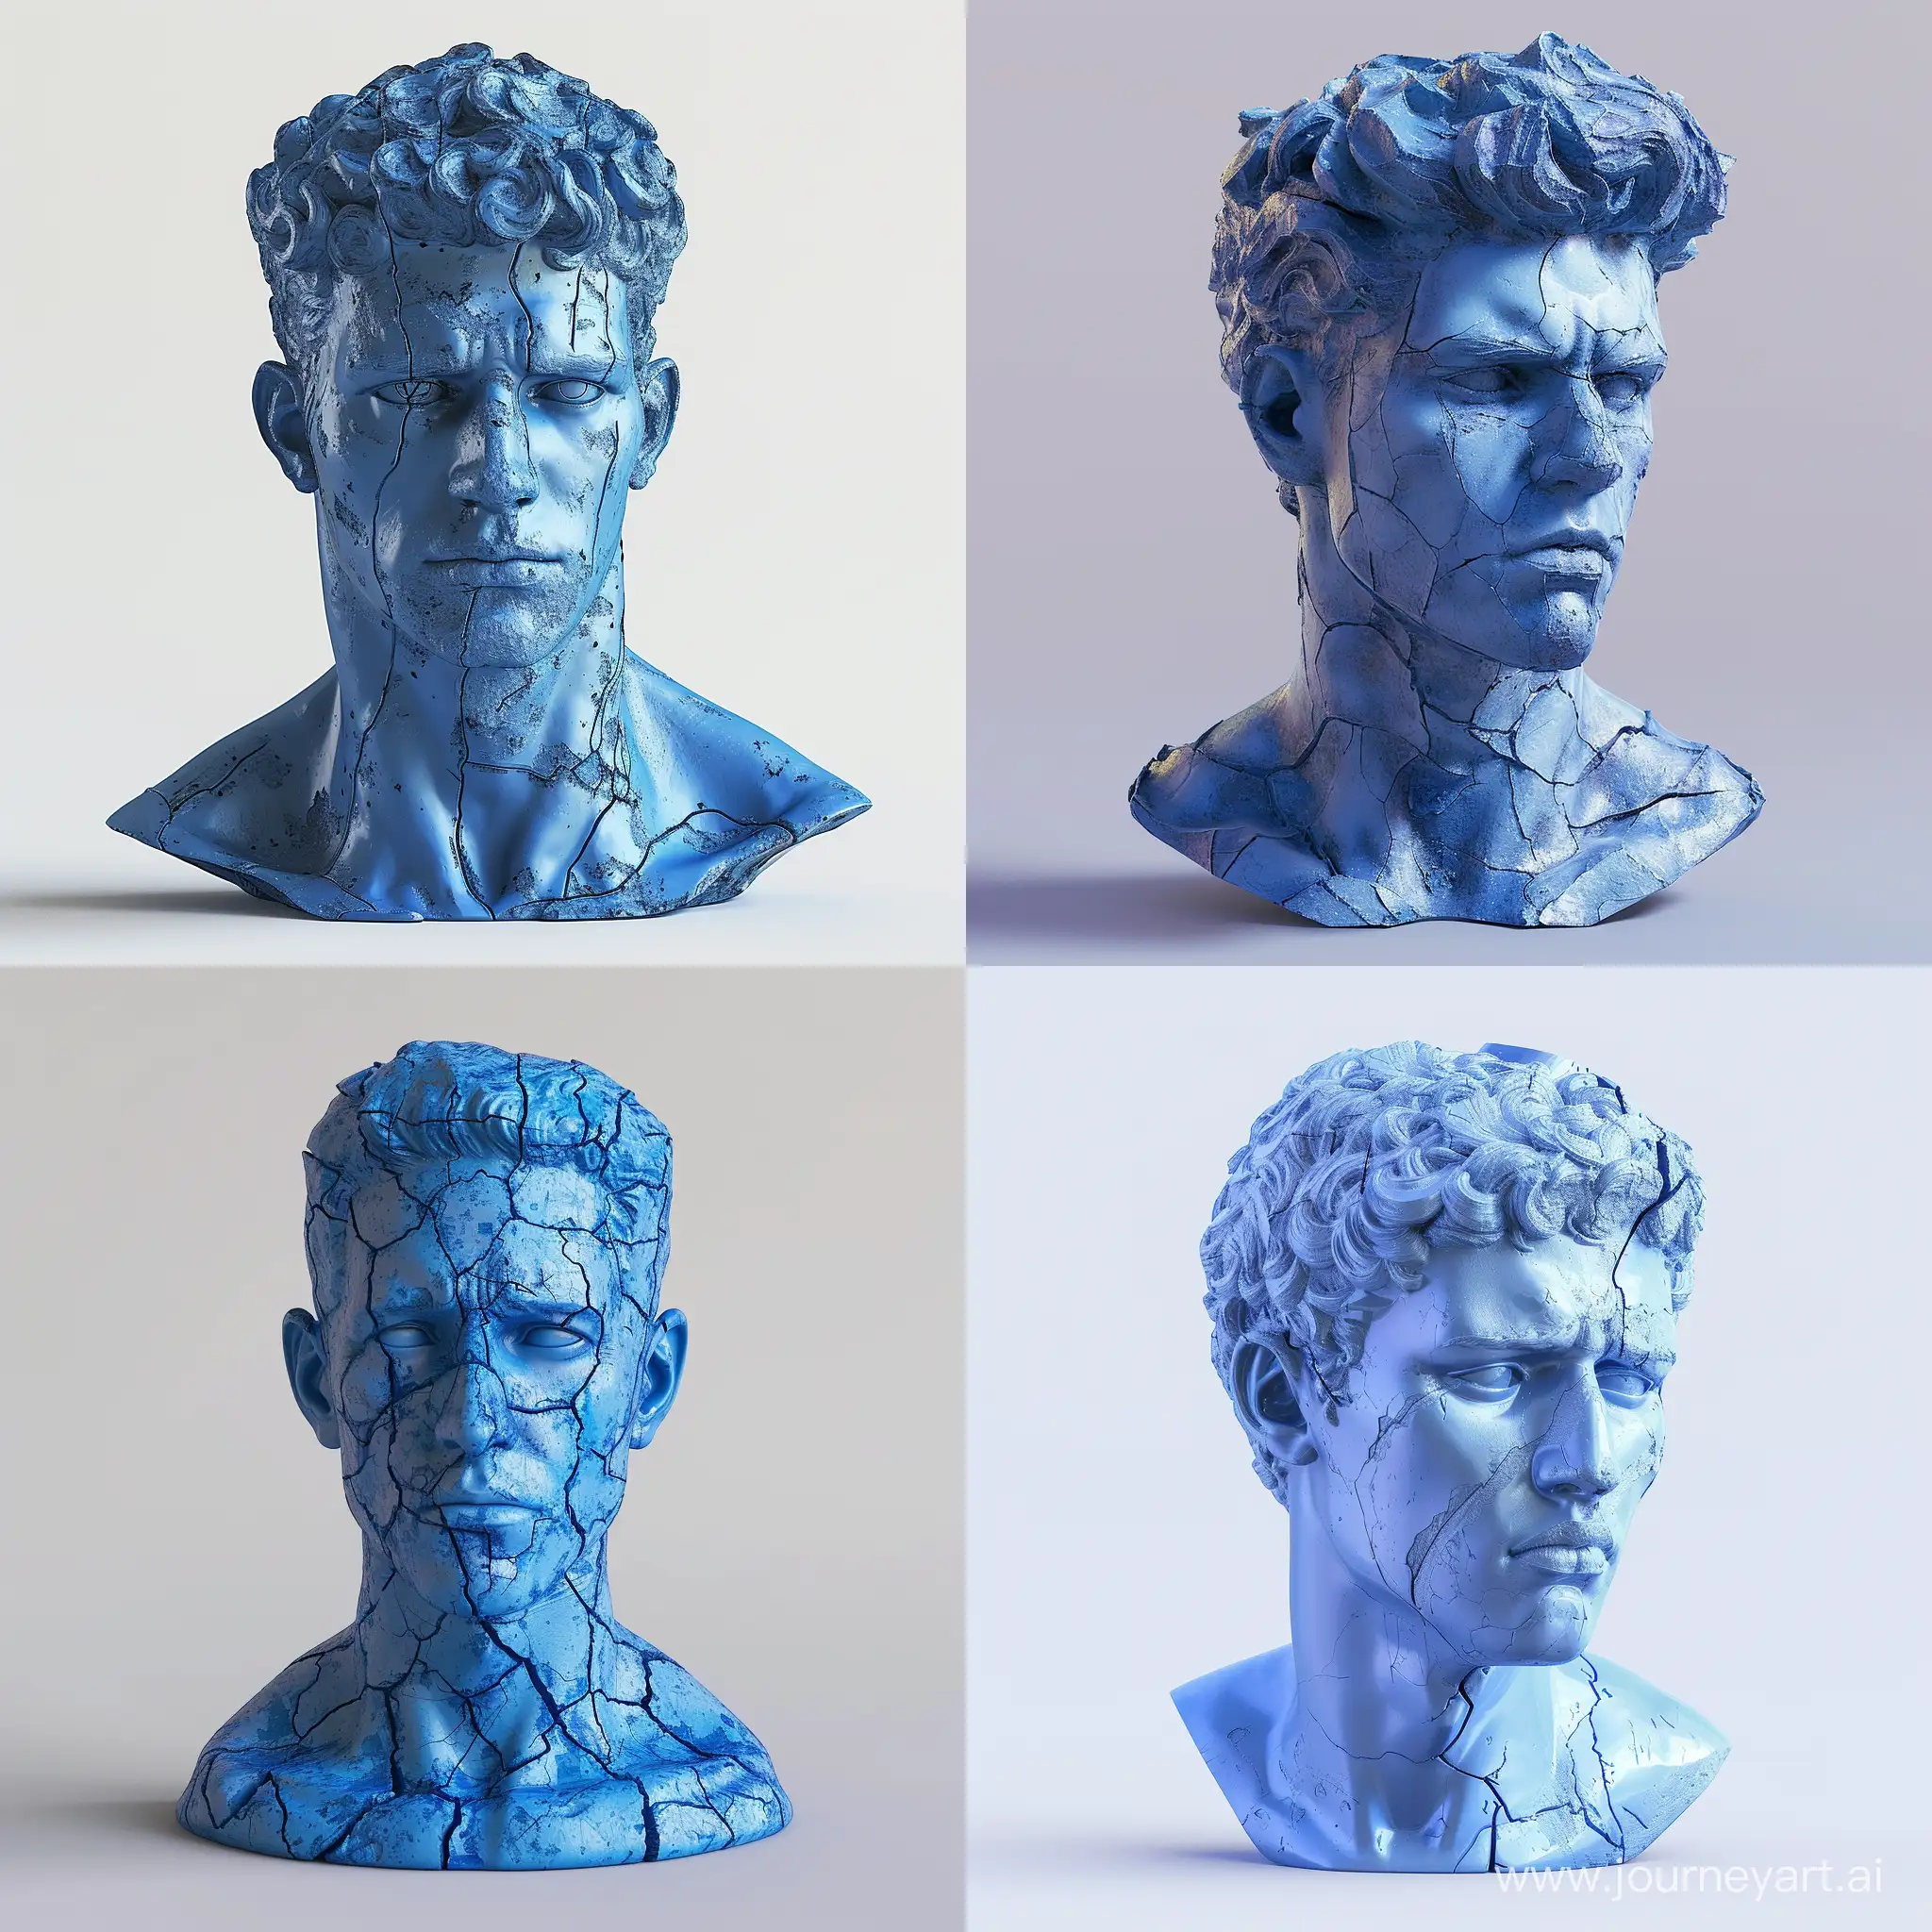 Blue-Men-Bust-Sculpture-with-Blistered-Texture-in-Headshot-Pose